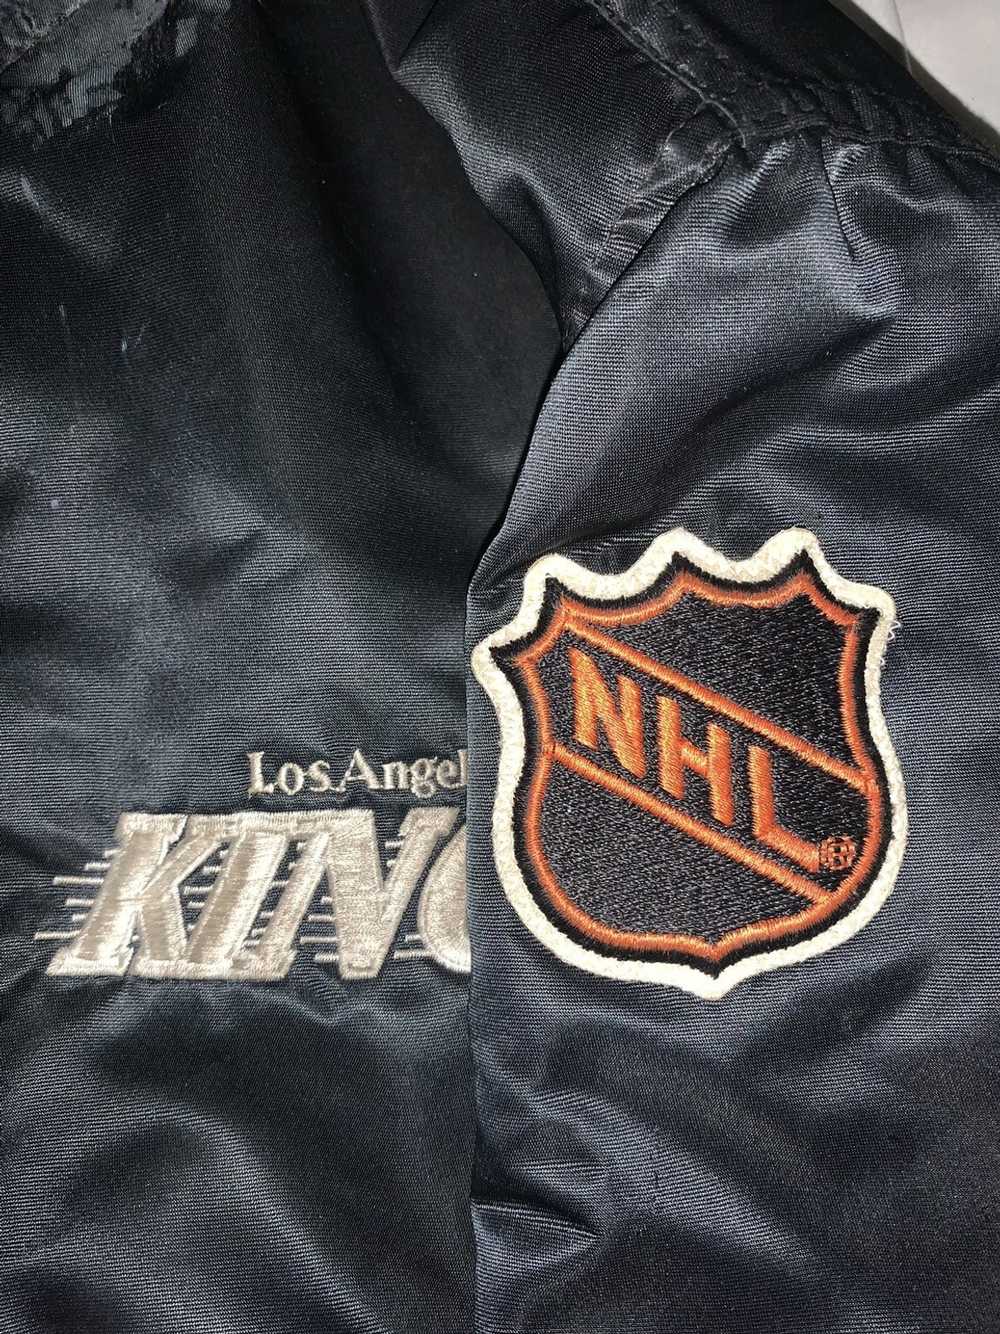 Kings debut gold throwback sweater for Legends Night —